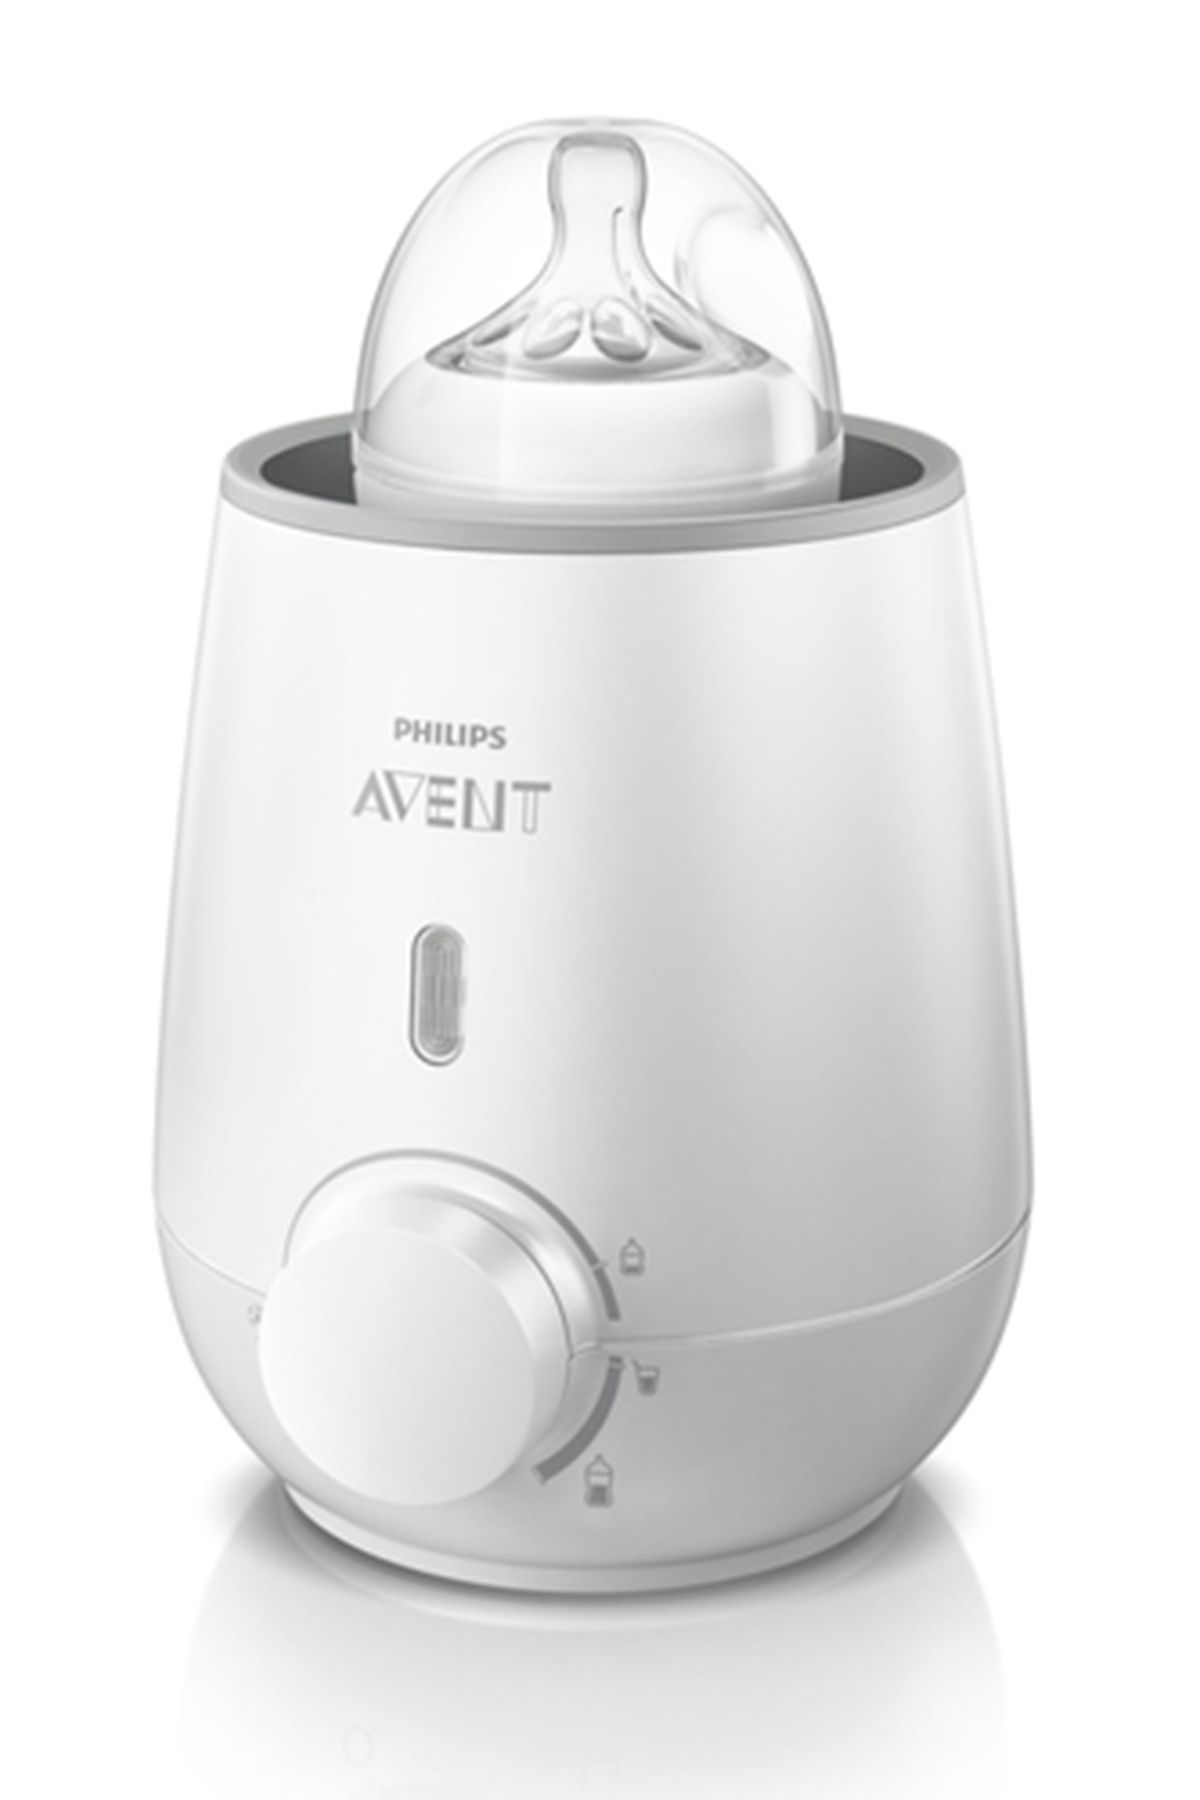 Philips Avent  Babys Fast Electric Bottle Warmer 